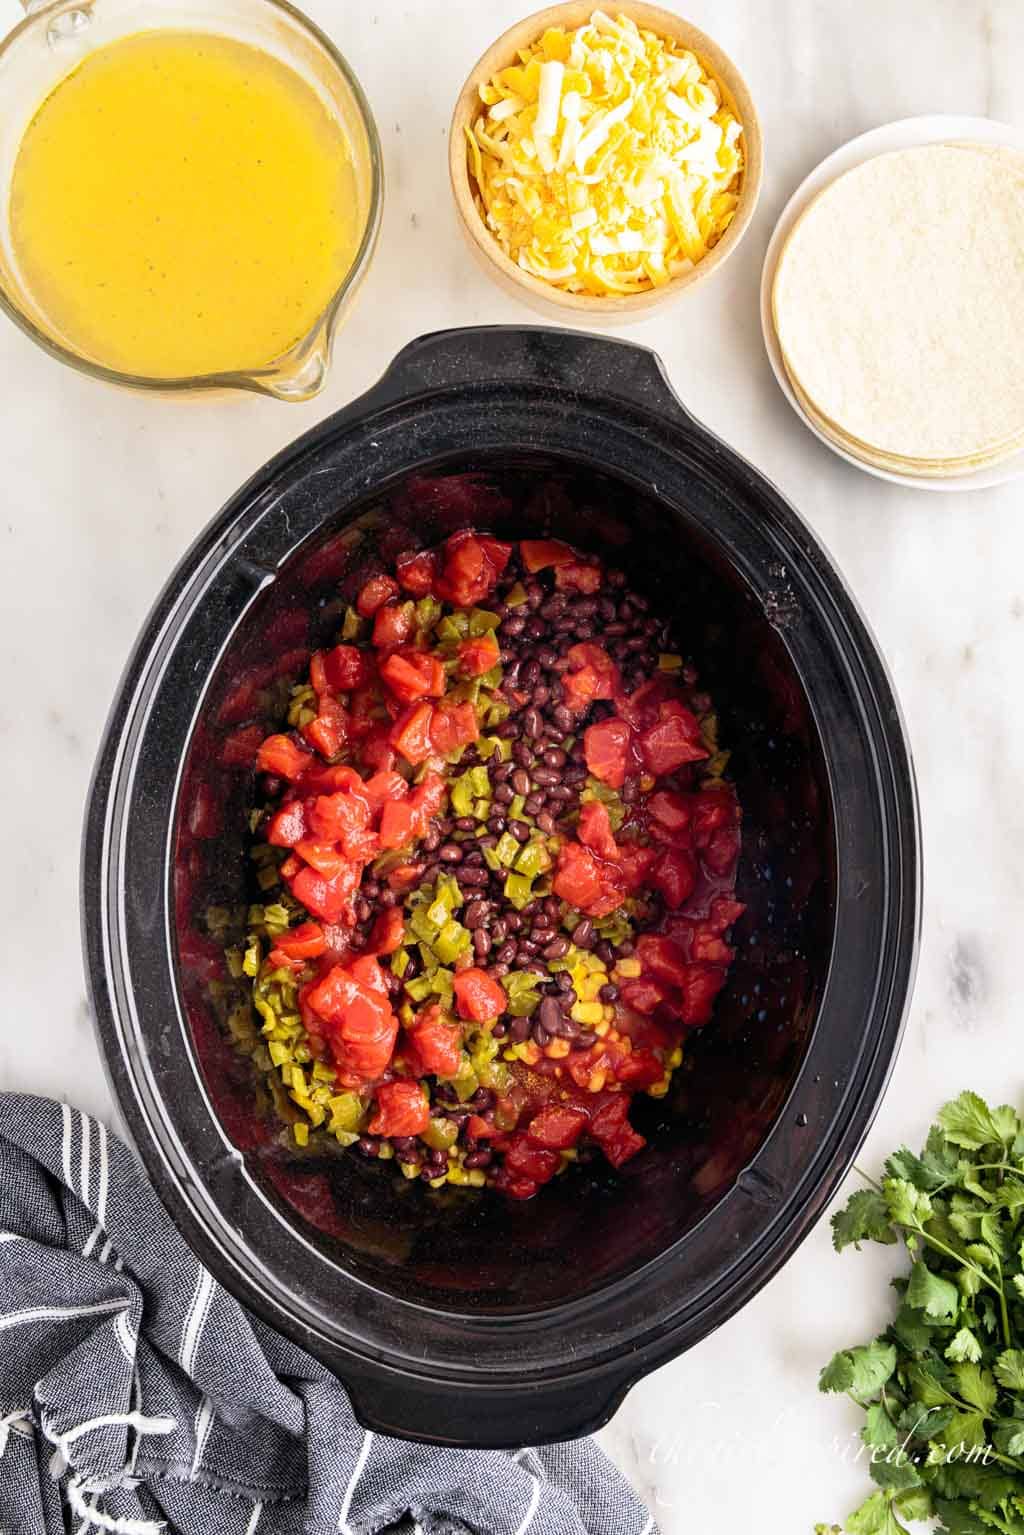 tomatoes, chiles, black beans layered in the crockpot.